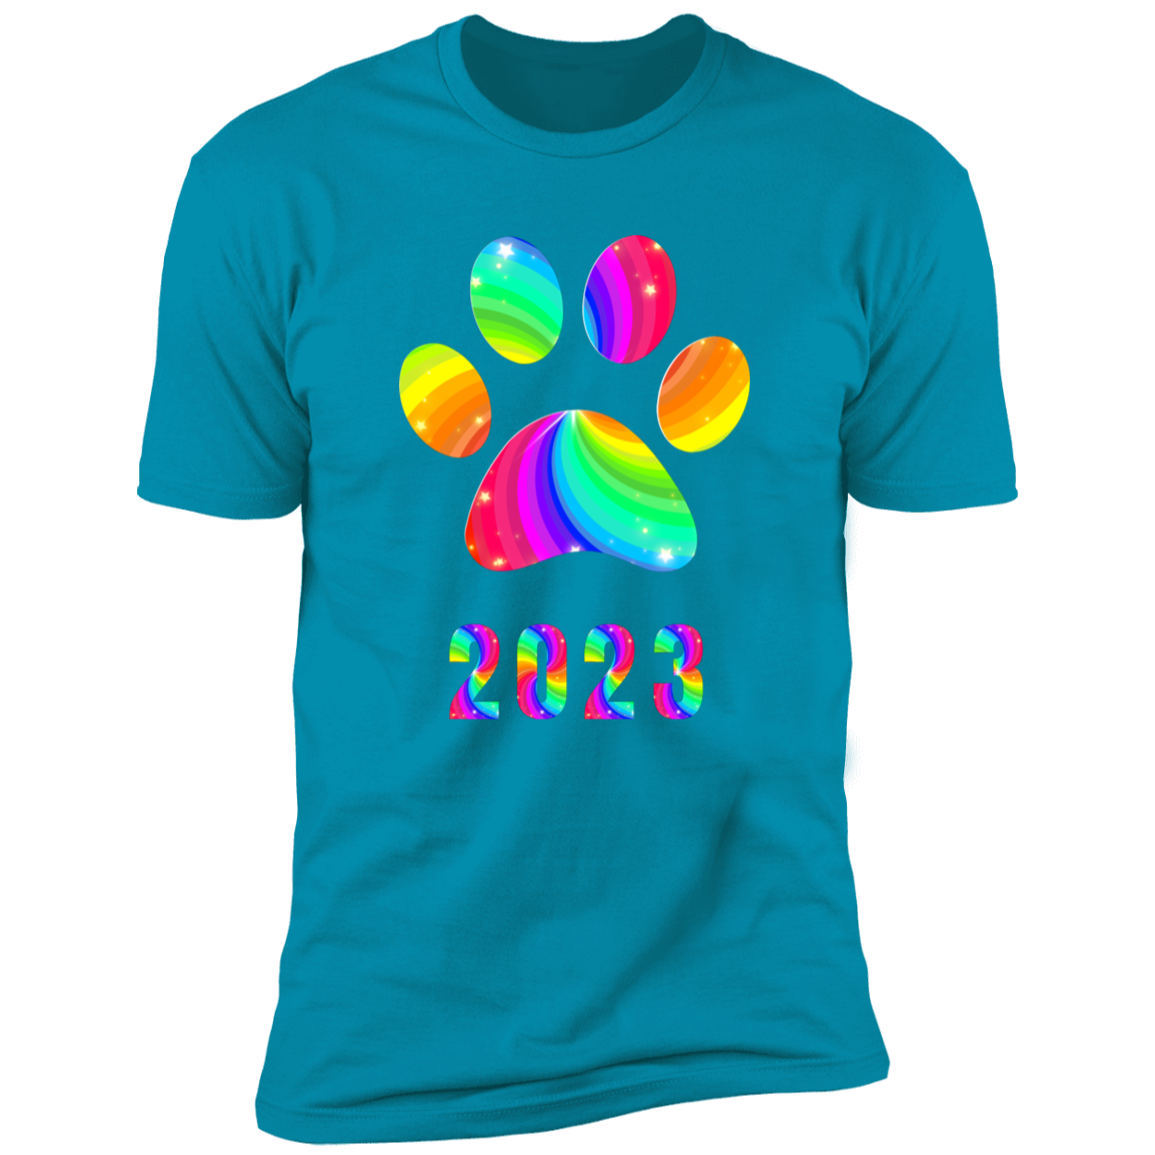 Pride Paw 2023 (Swirl) Pride T-shirt, Paw Pride Dog Shirt for humans, in turquoie